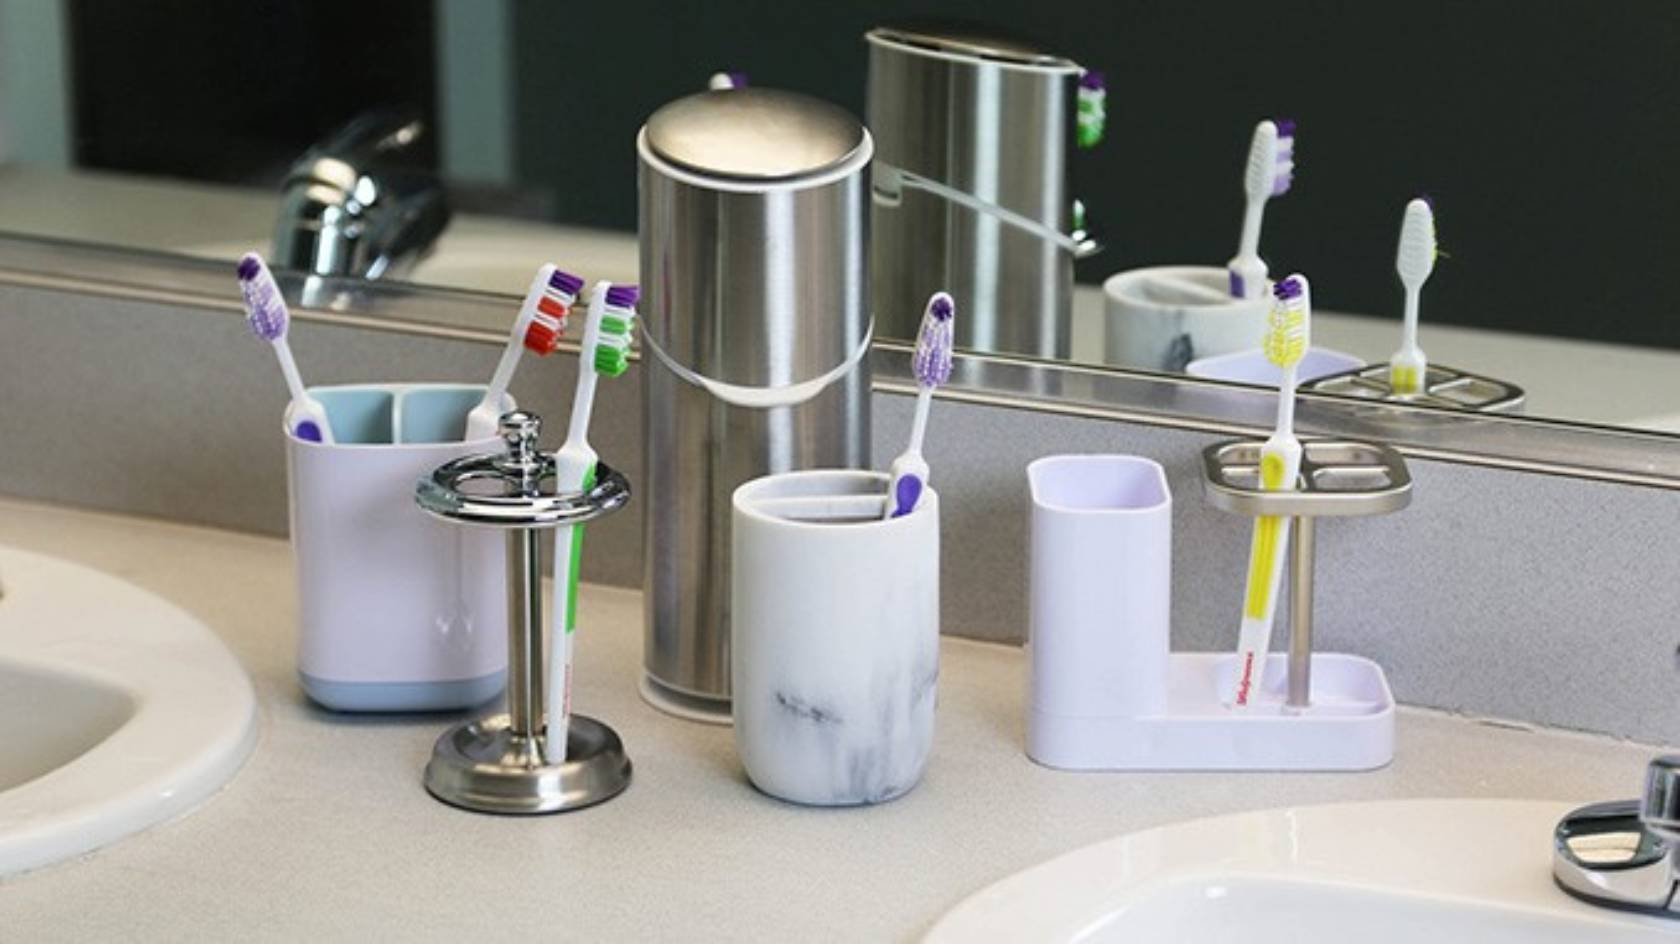 How to clean your toothbrush holder and keep it sanitized